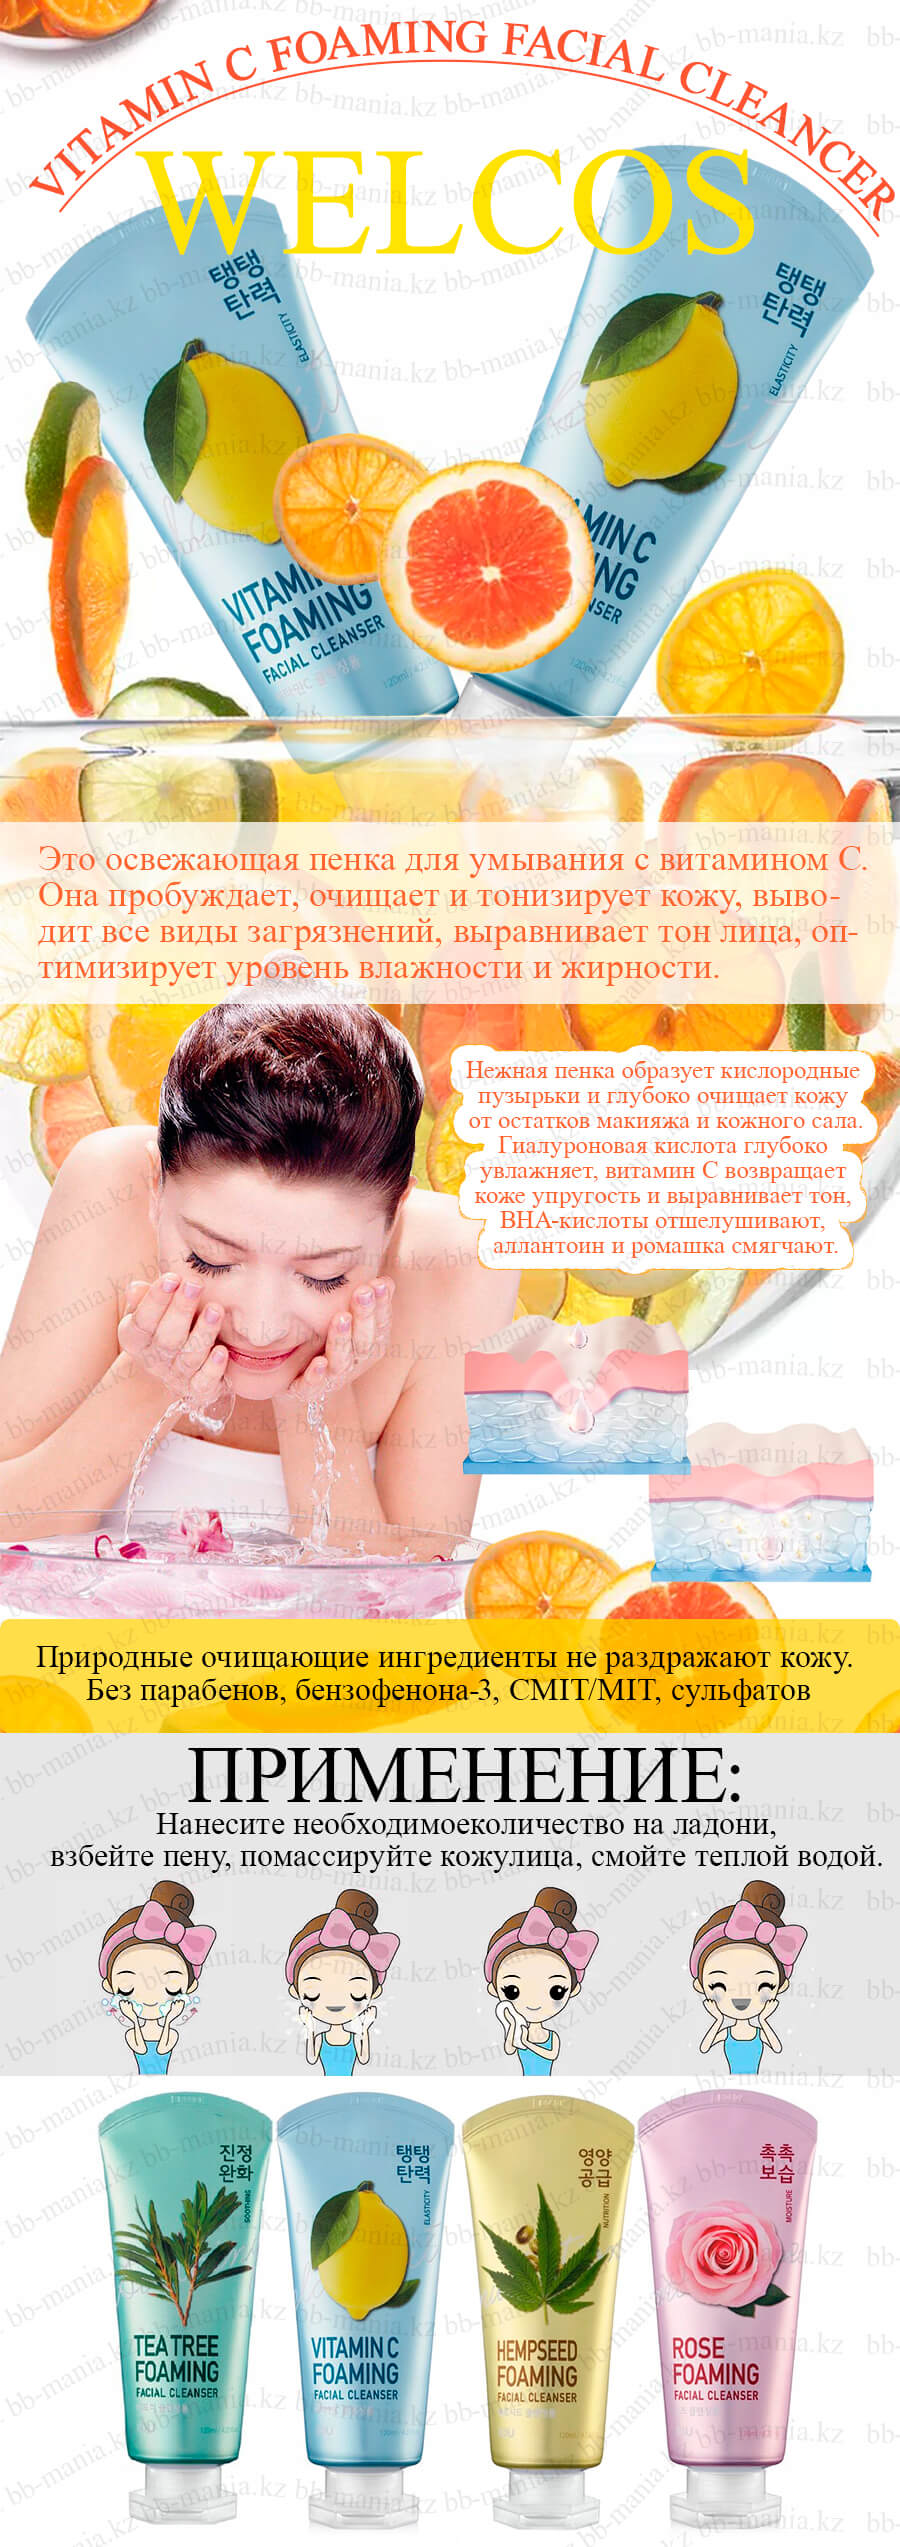 Vitamin-C-Foaming-Facial-Cleancer-[Welcos]